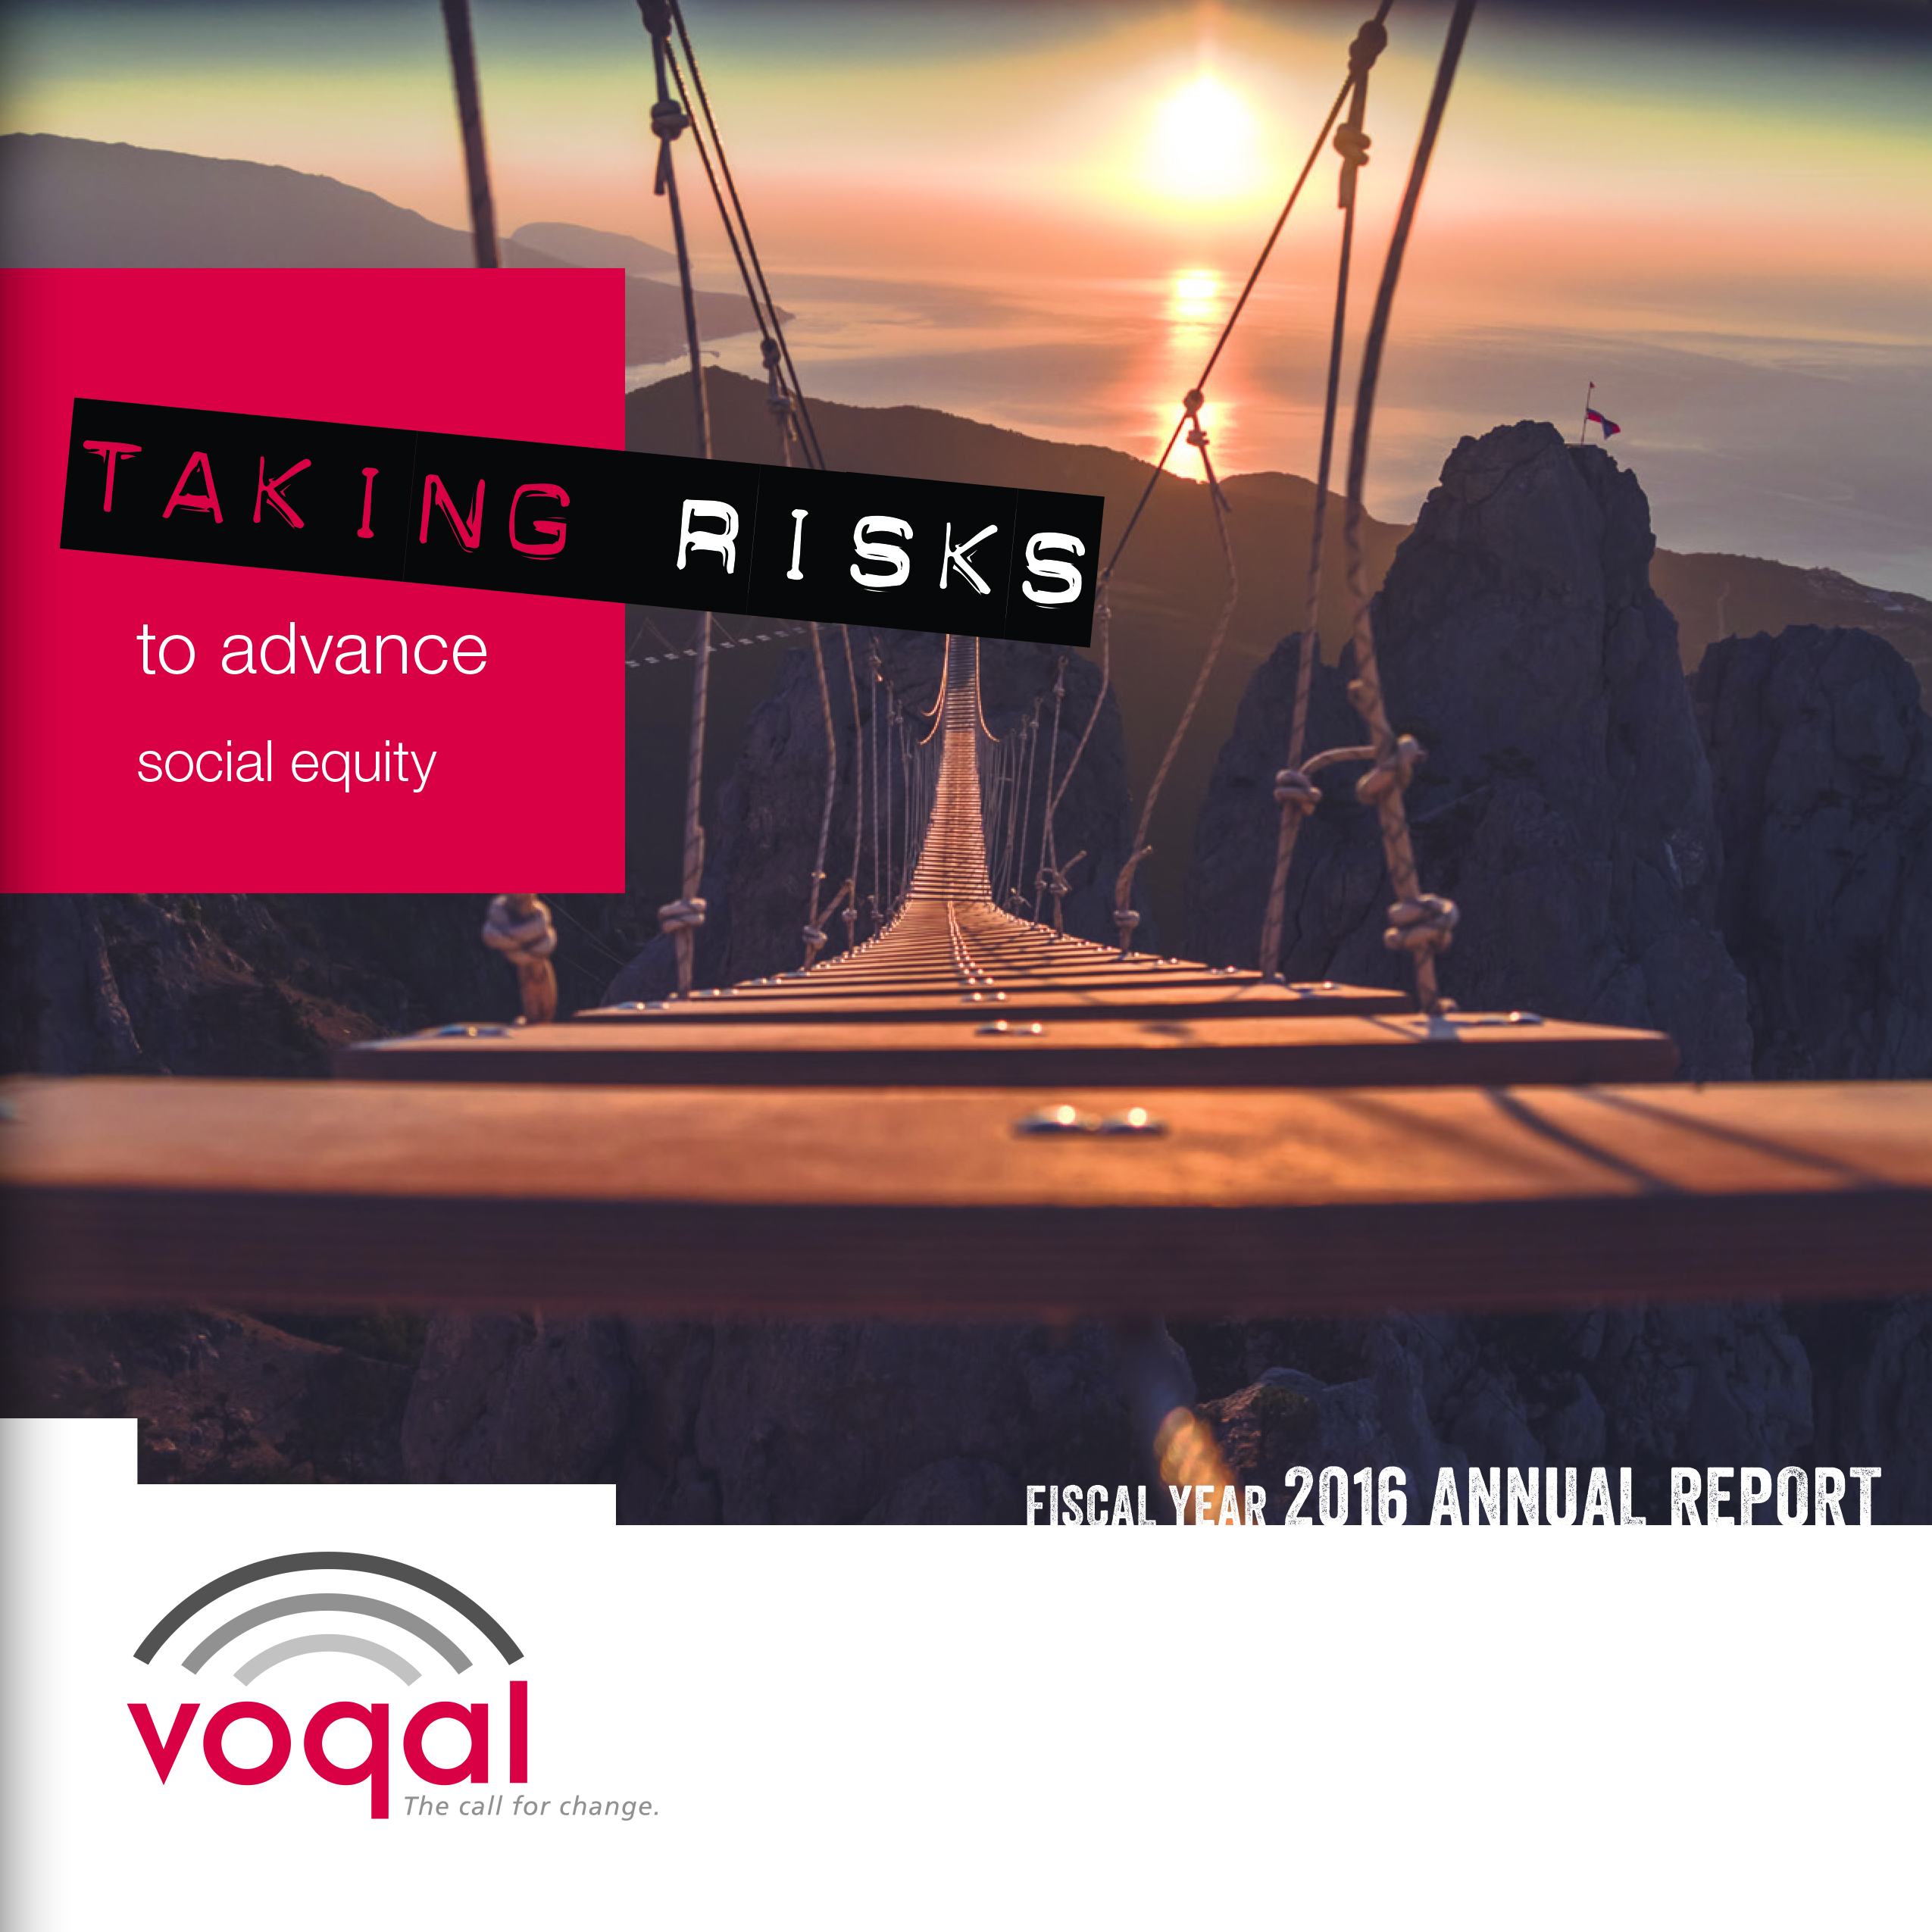 2016 Voqal Annual Report - Taking Risks